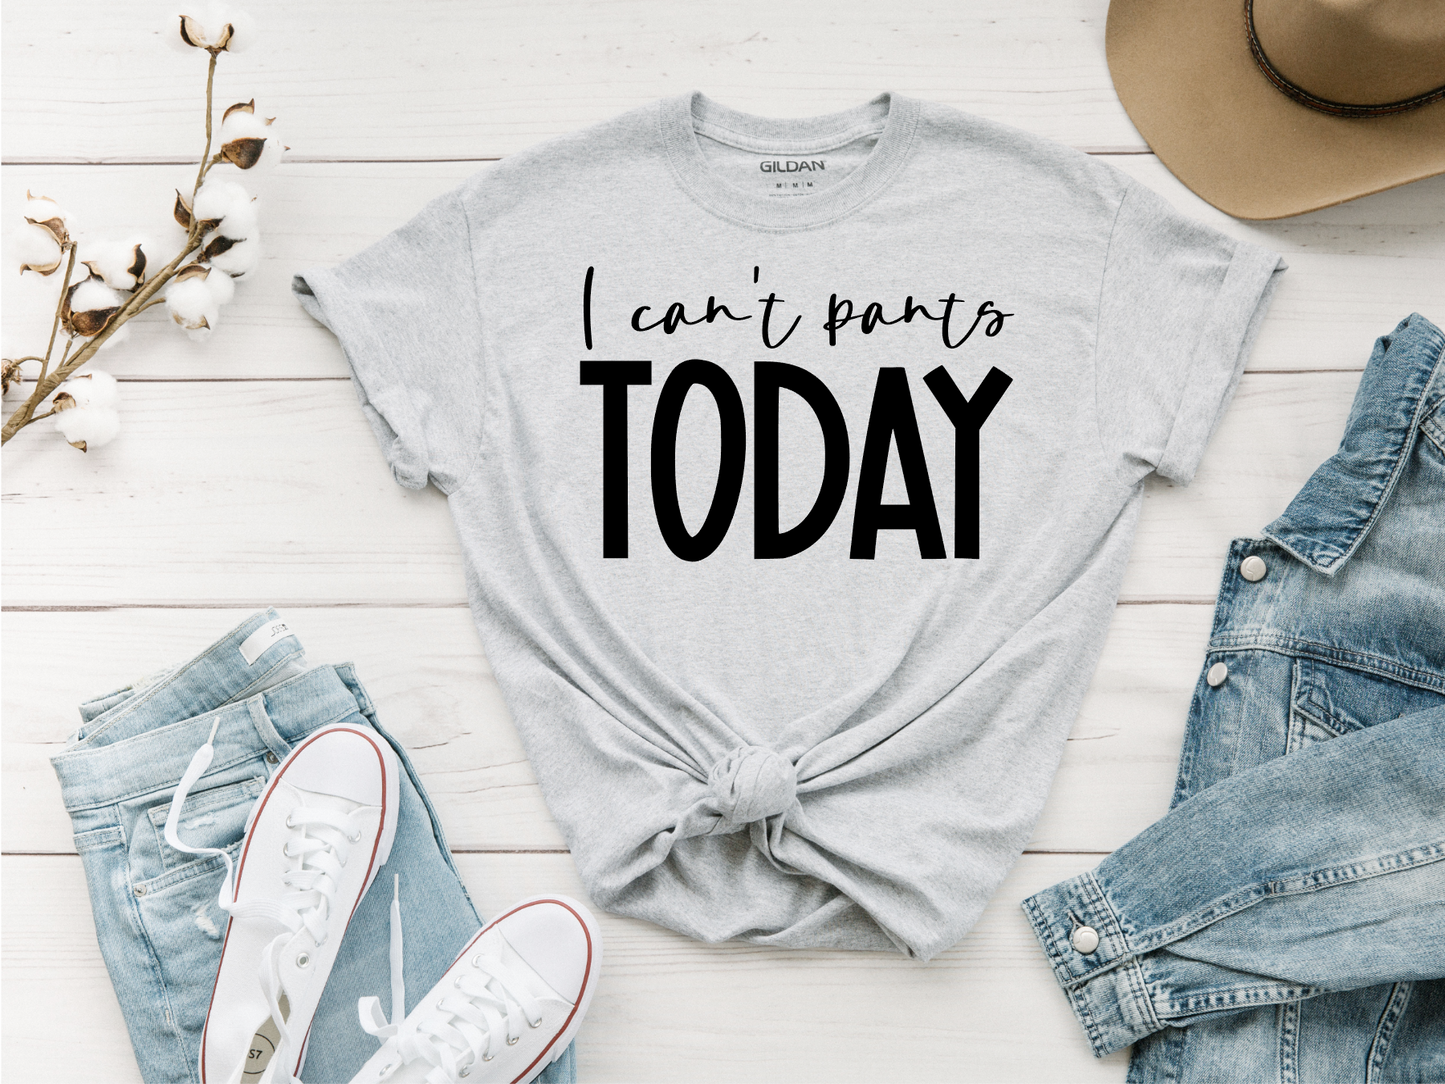 I Can't Pants Today - Sublimation